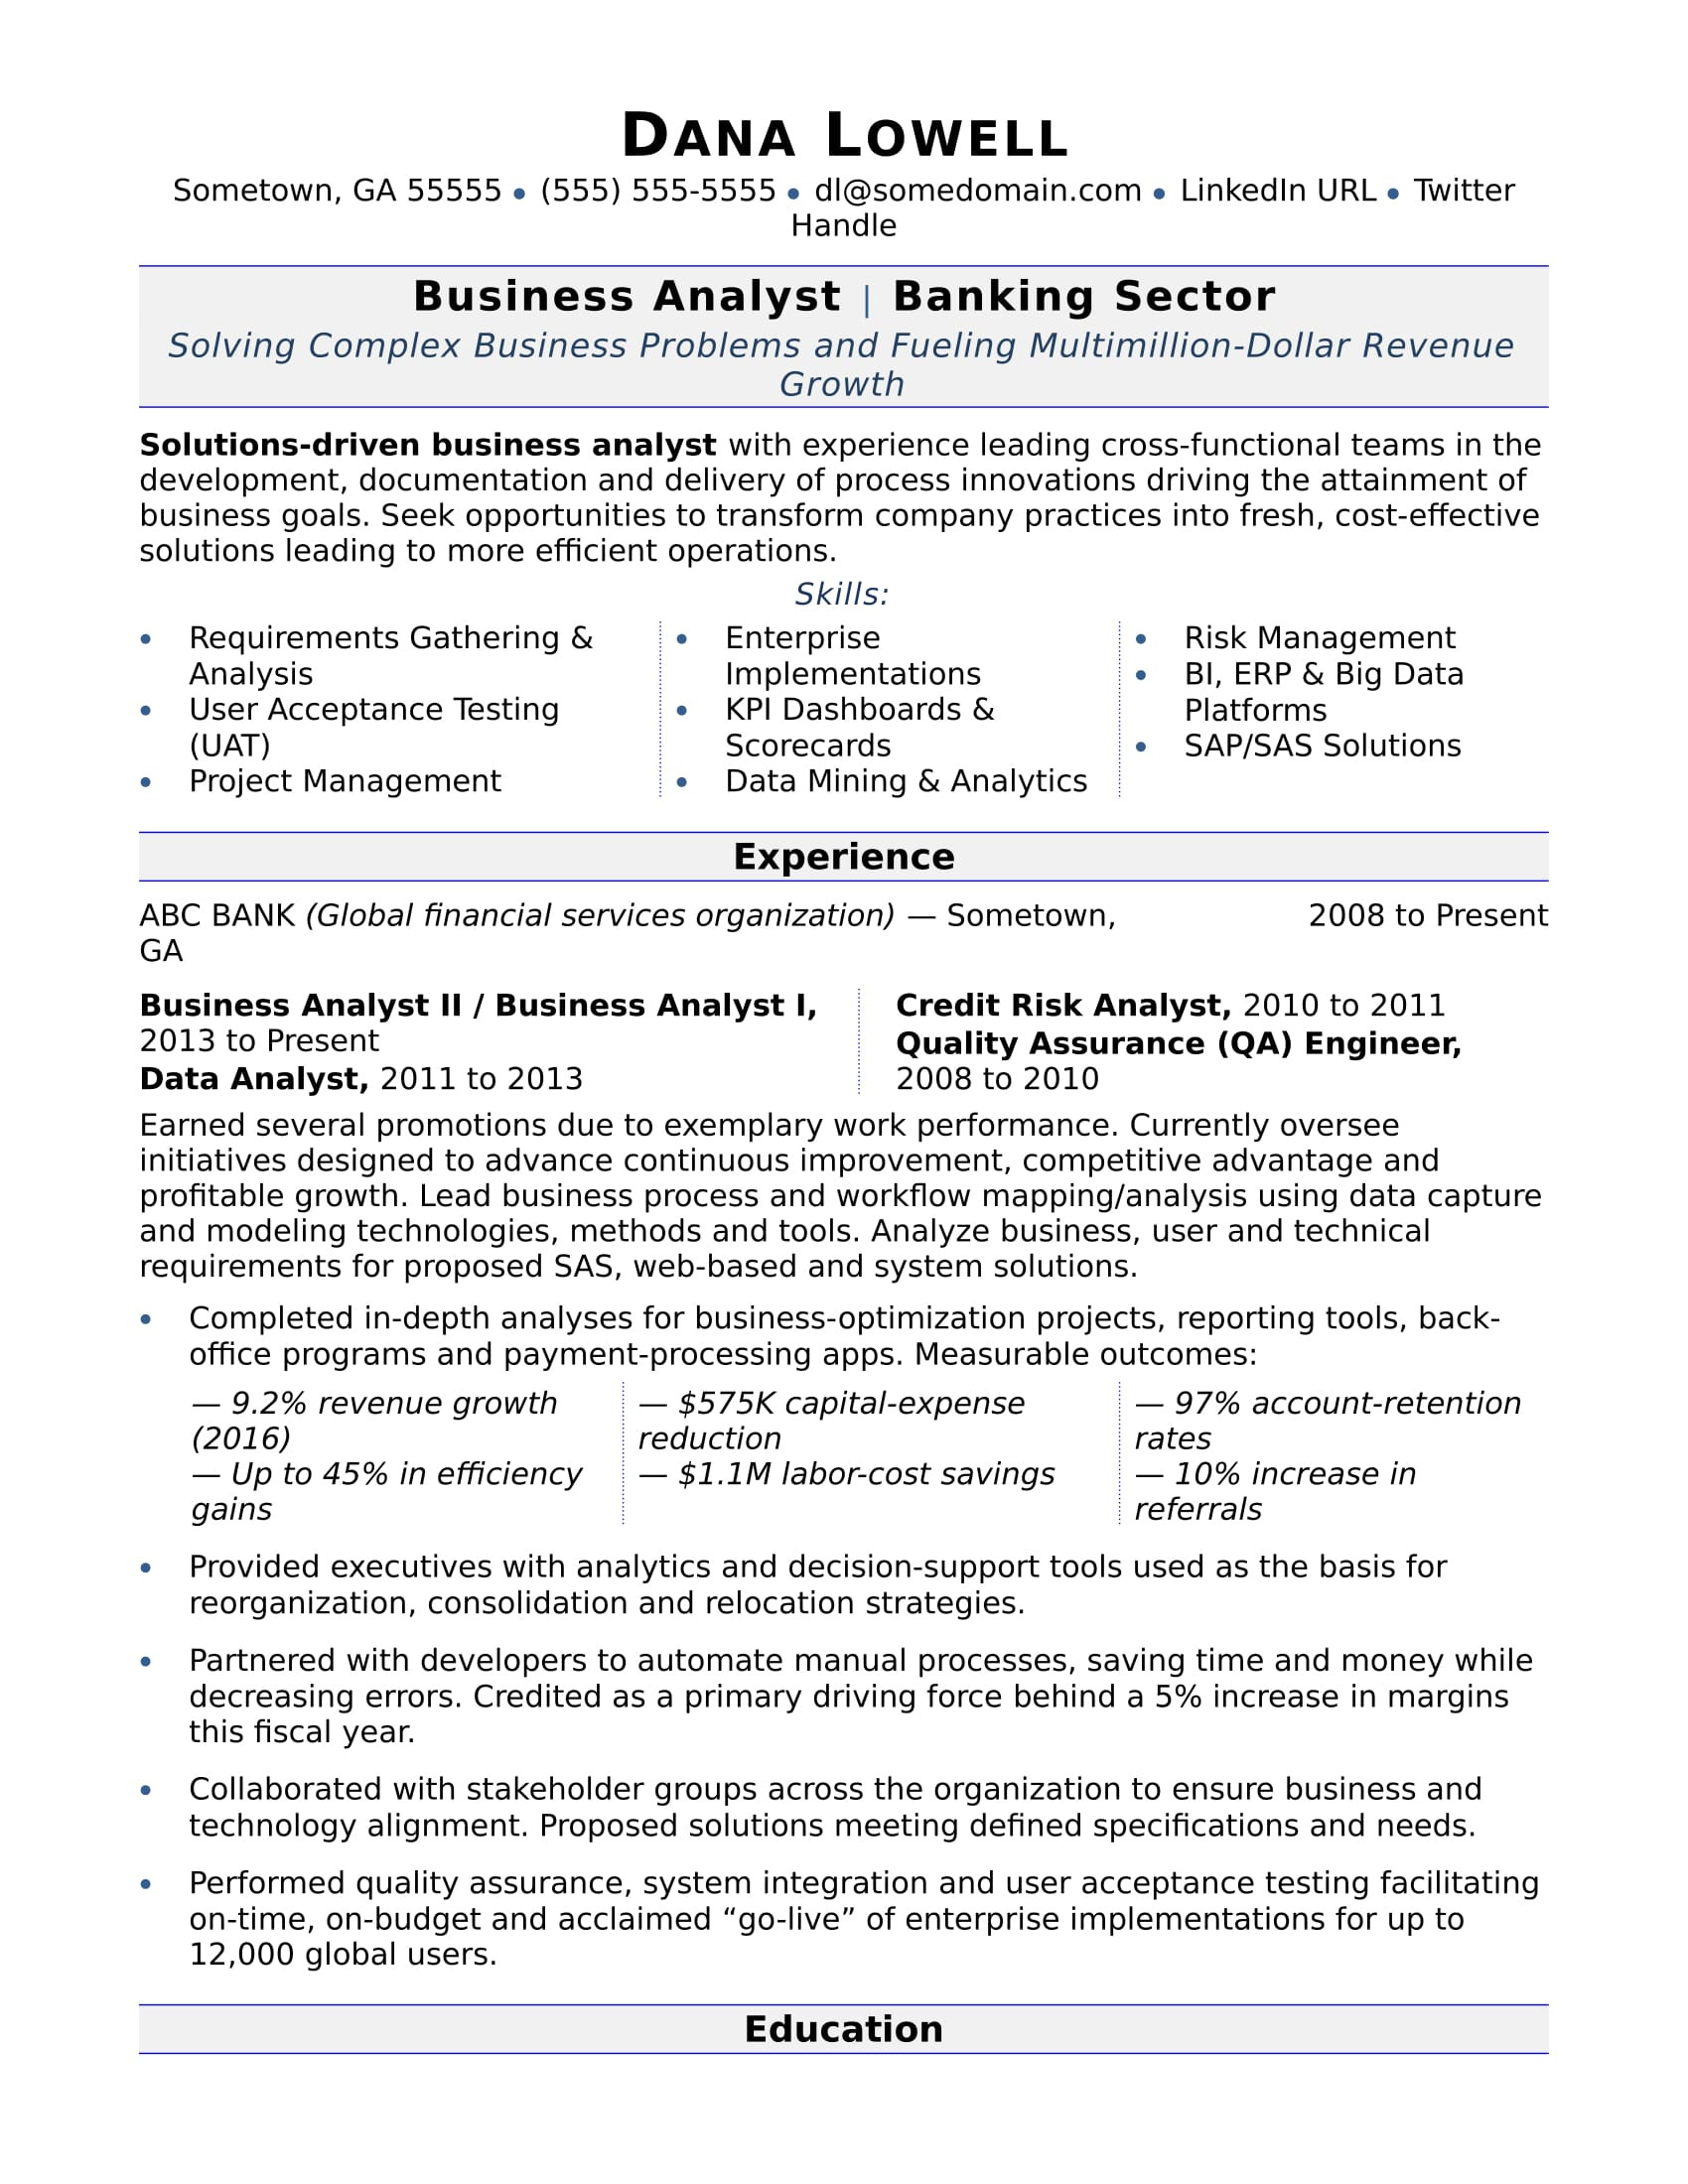 Sample 2 Years Business Analyst Resumes Business Analyst Resume Monster.com